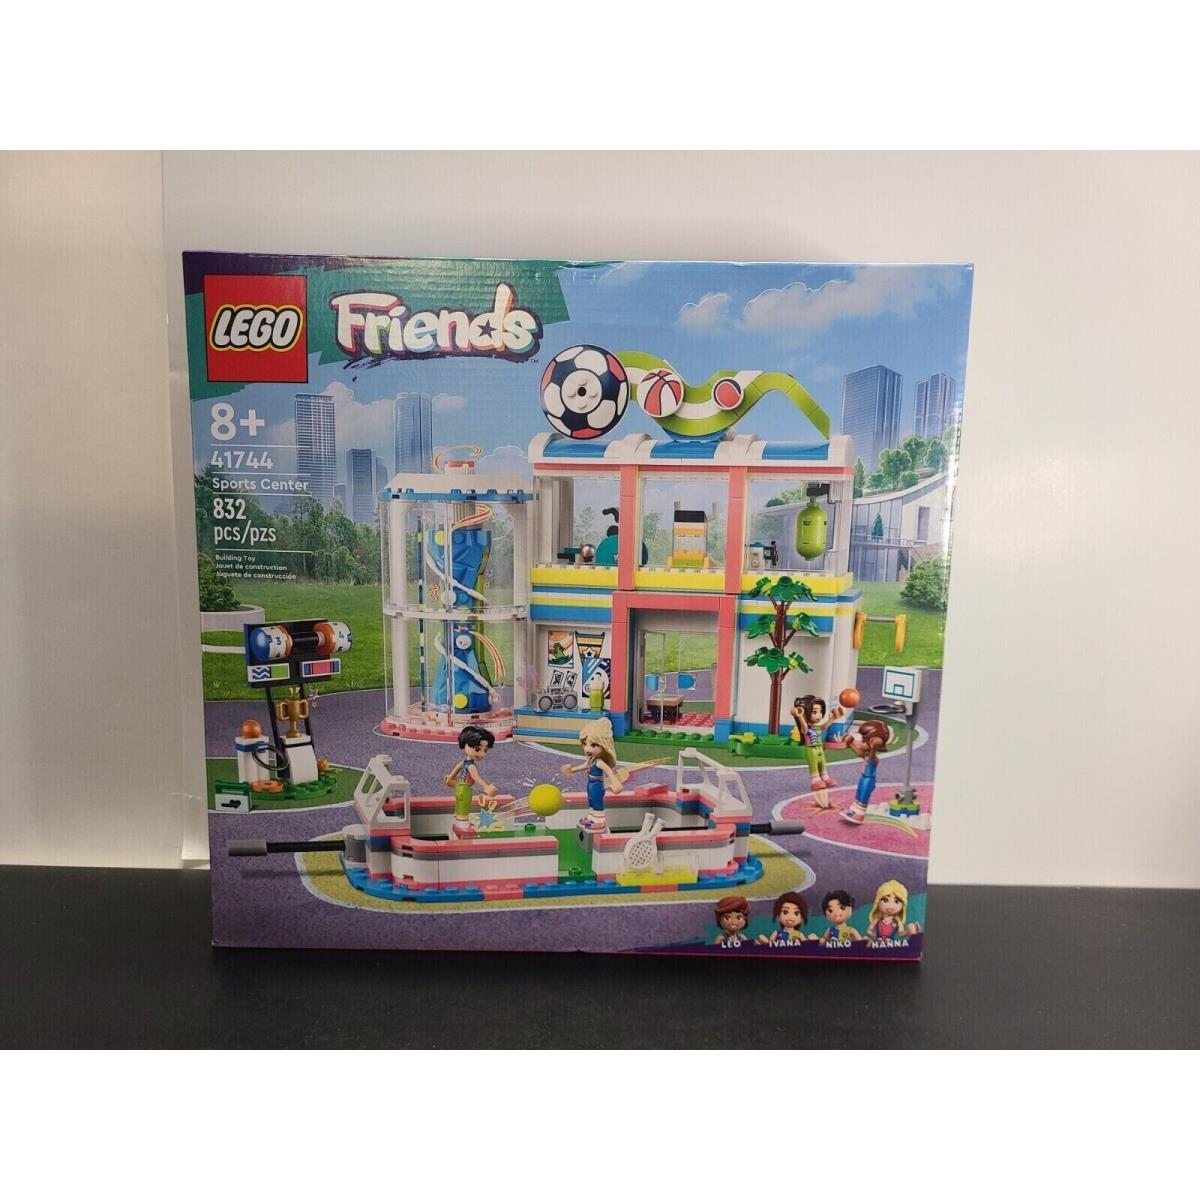 Lego Friends Sports Center 41744 Building Toy Set For Boys and Girls Ages 8